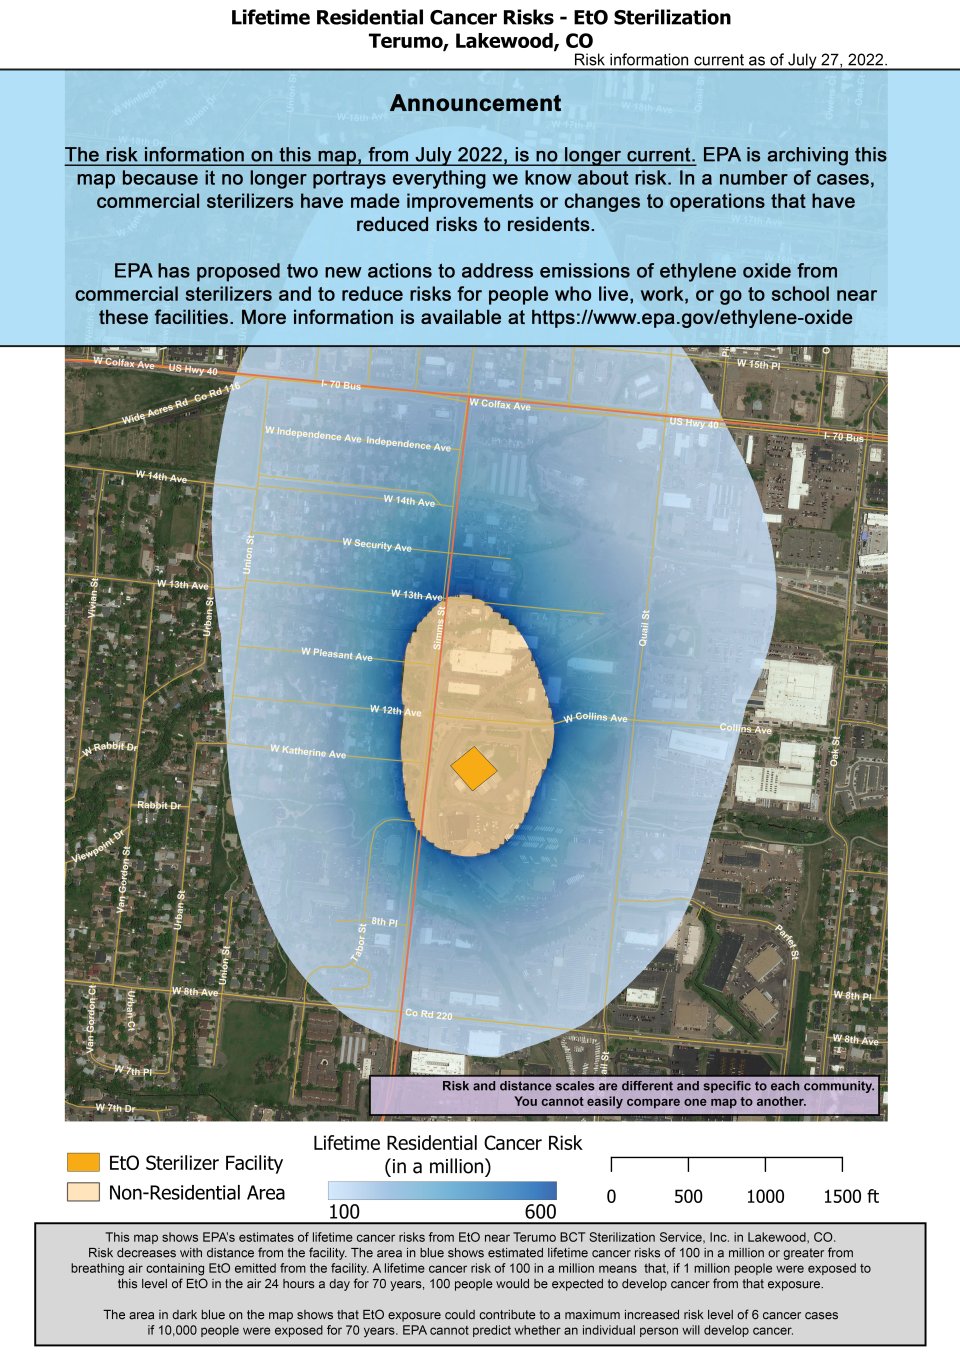 This map shows EPA’s estimate of lifetime cancer risks from breathing ethylene oxide near Terumo located at 10811 Collins Ave, in Lakewood, CO. The area in blue shows estimated lifetime cancer risks of 100 in a million or greater from breathing air containing EtO emitted from the facility. Nearest the facility, the estimated lifetime cancer risk is 624 in a million. Estimated cancer risk decreases with distance from the facility. 